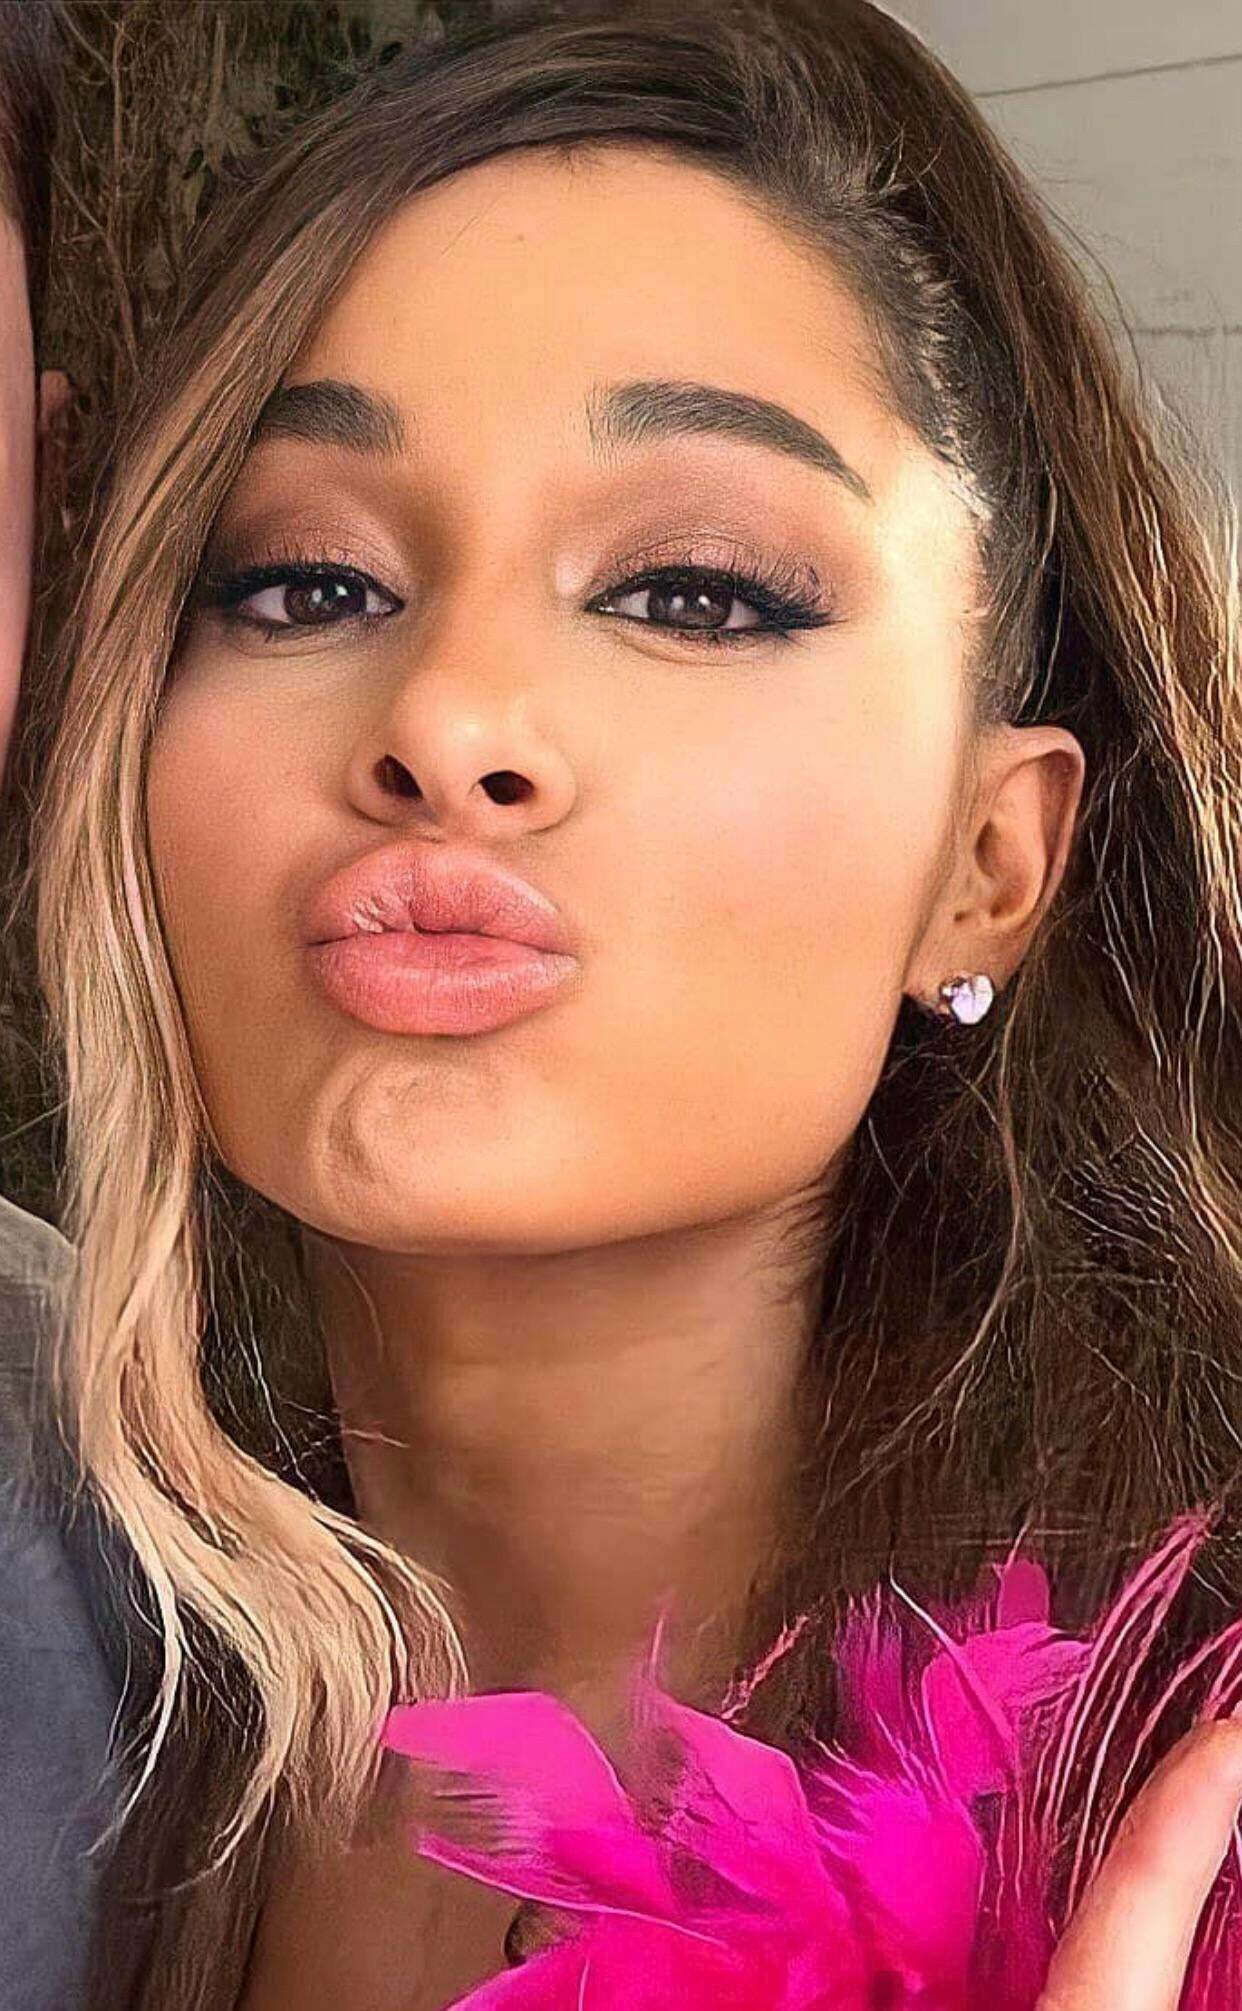 I’ve got 2 hours before I have to go to work. Think I should spend that whole time edging for Ariana Grande’s perfect face and lips?